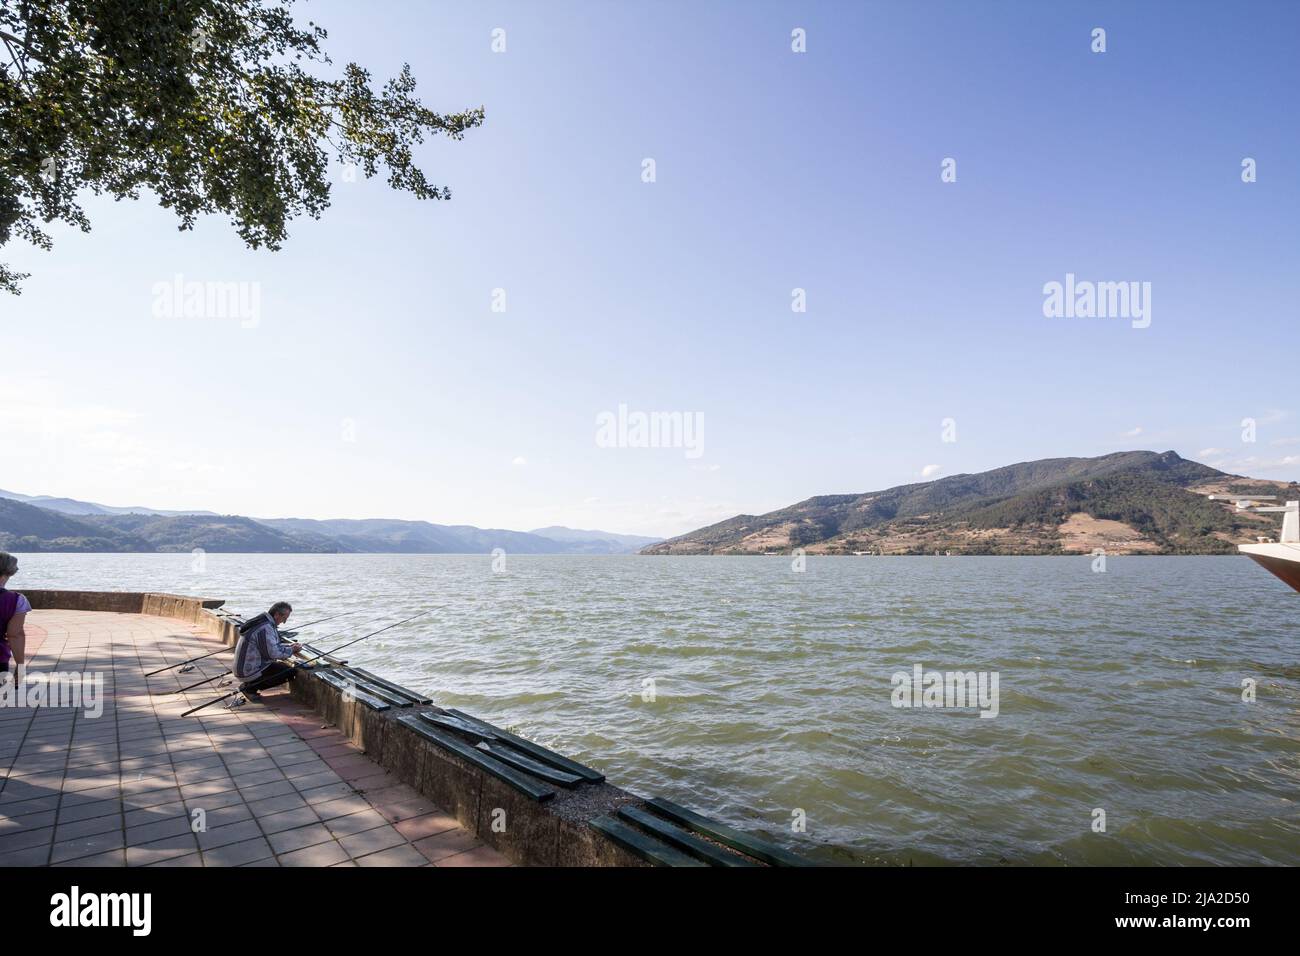 Picture of two men fishing in the Serbian city of Donji Milanovac on the Danube river, The city is located in the Danube gorges, also known as iron ga Stock Photo